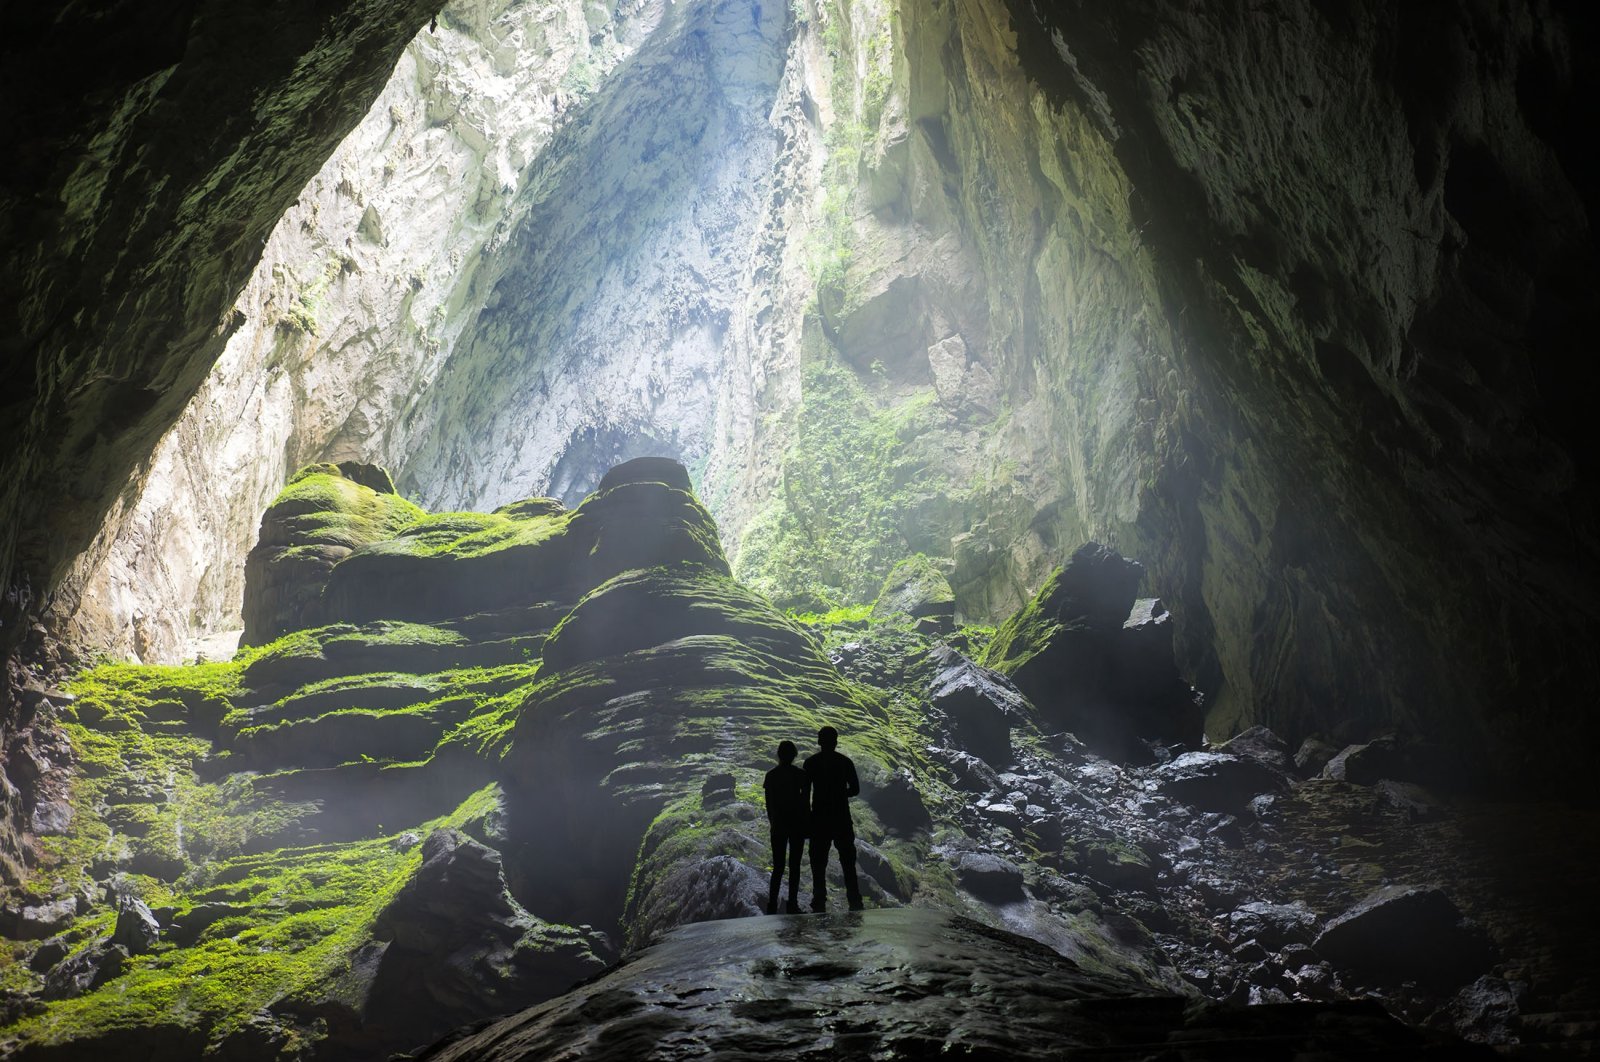 First discovered in 1991, the Son Doong cave in Vietnam is the largest cave in the world. (Shutterstock Photo)